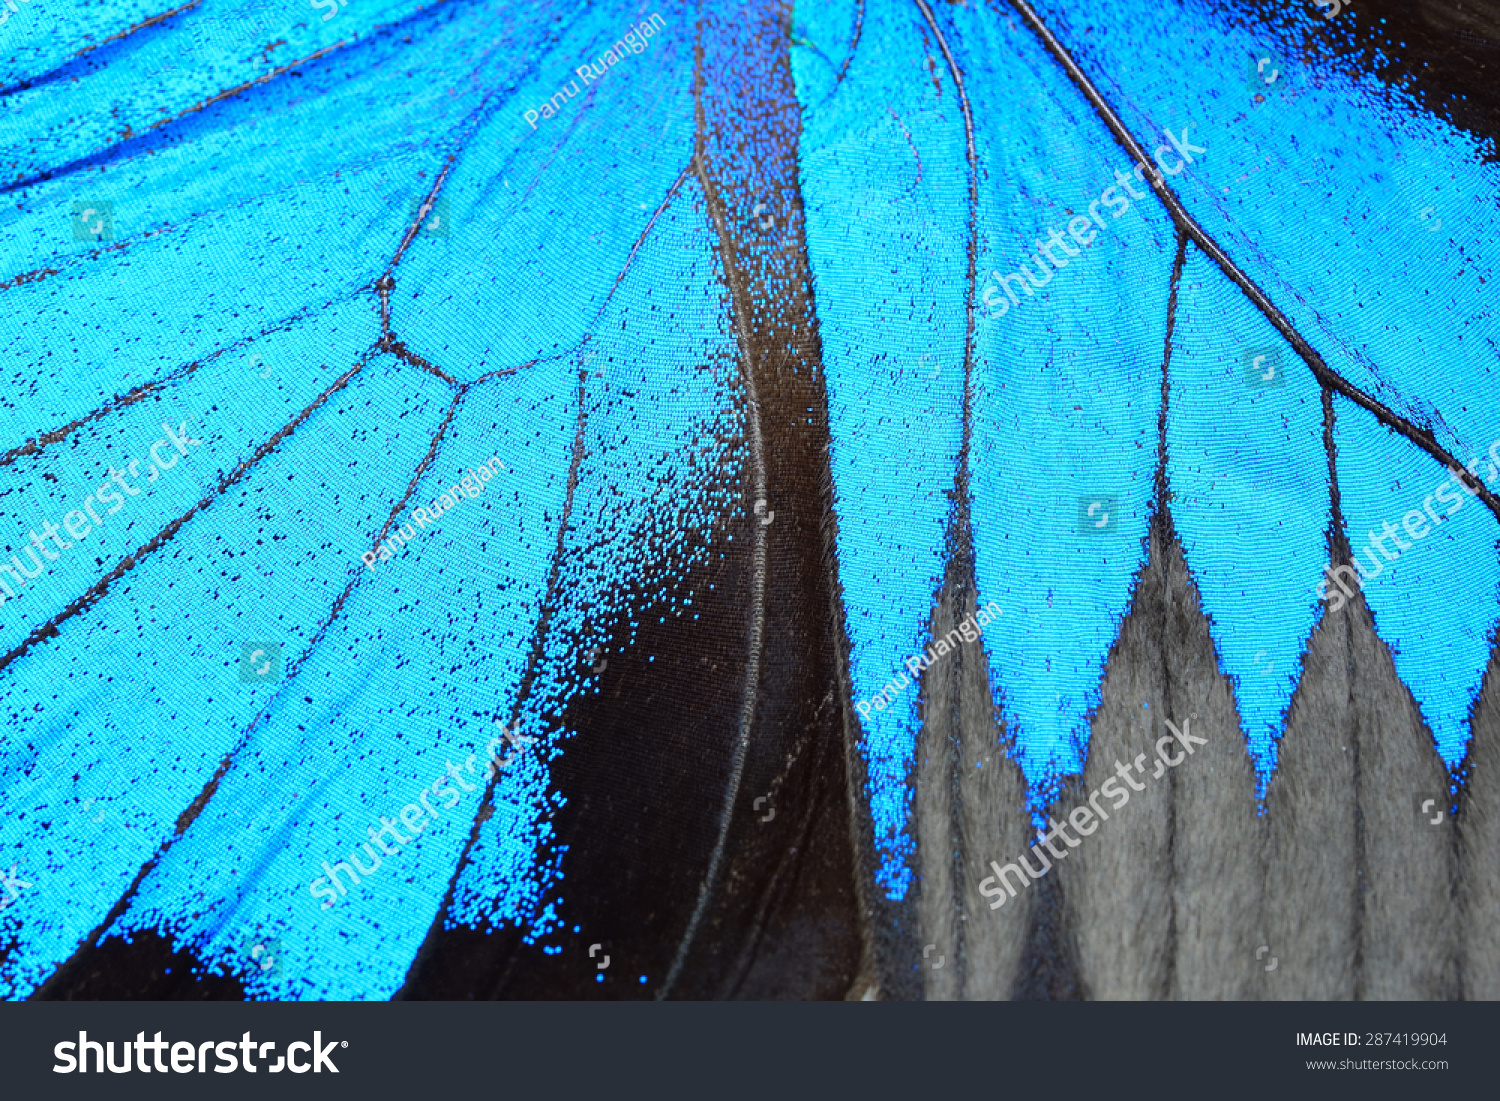 Blue butterfly wing, nature pattern texture background #287419904